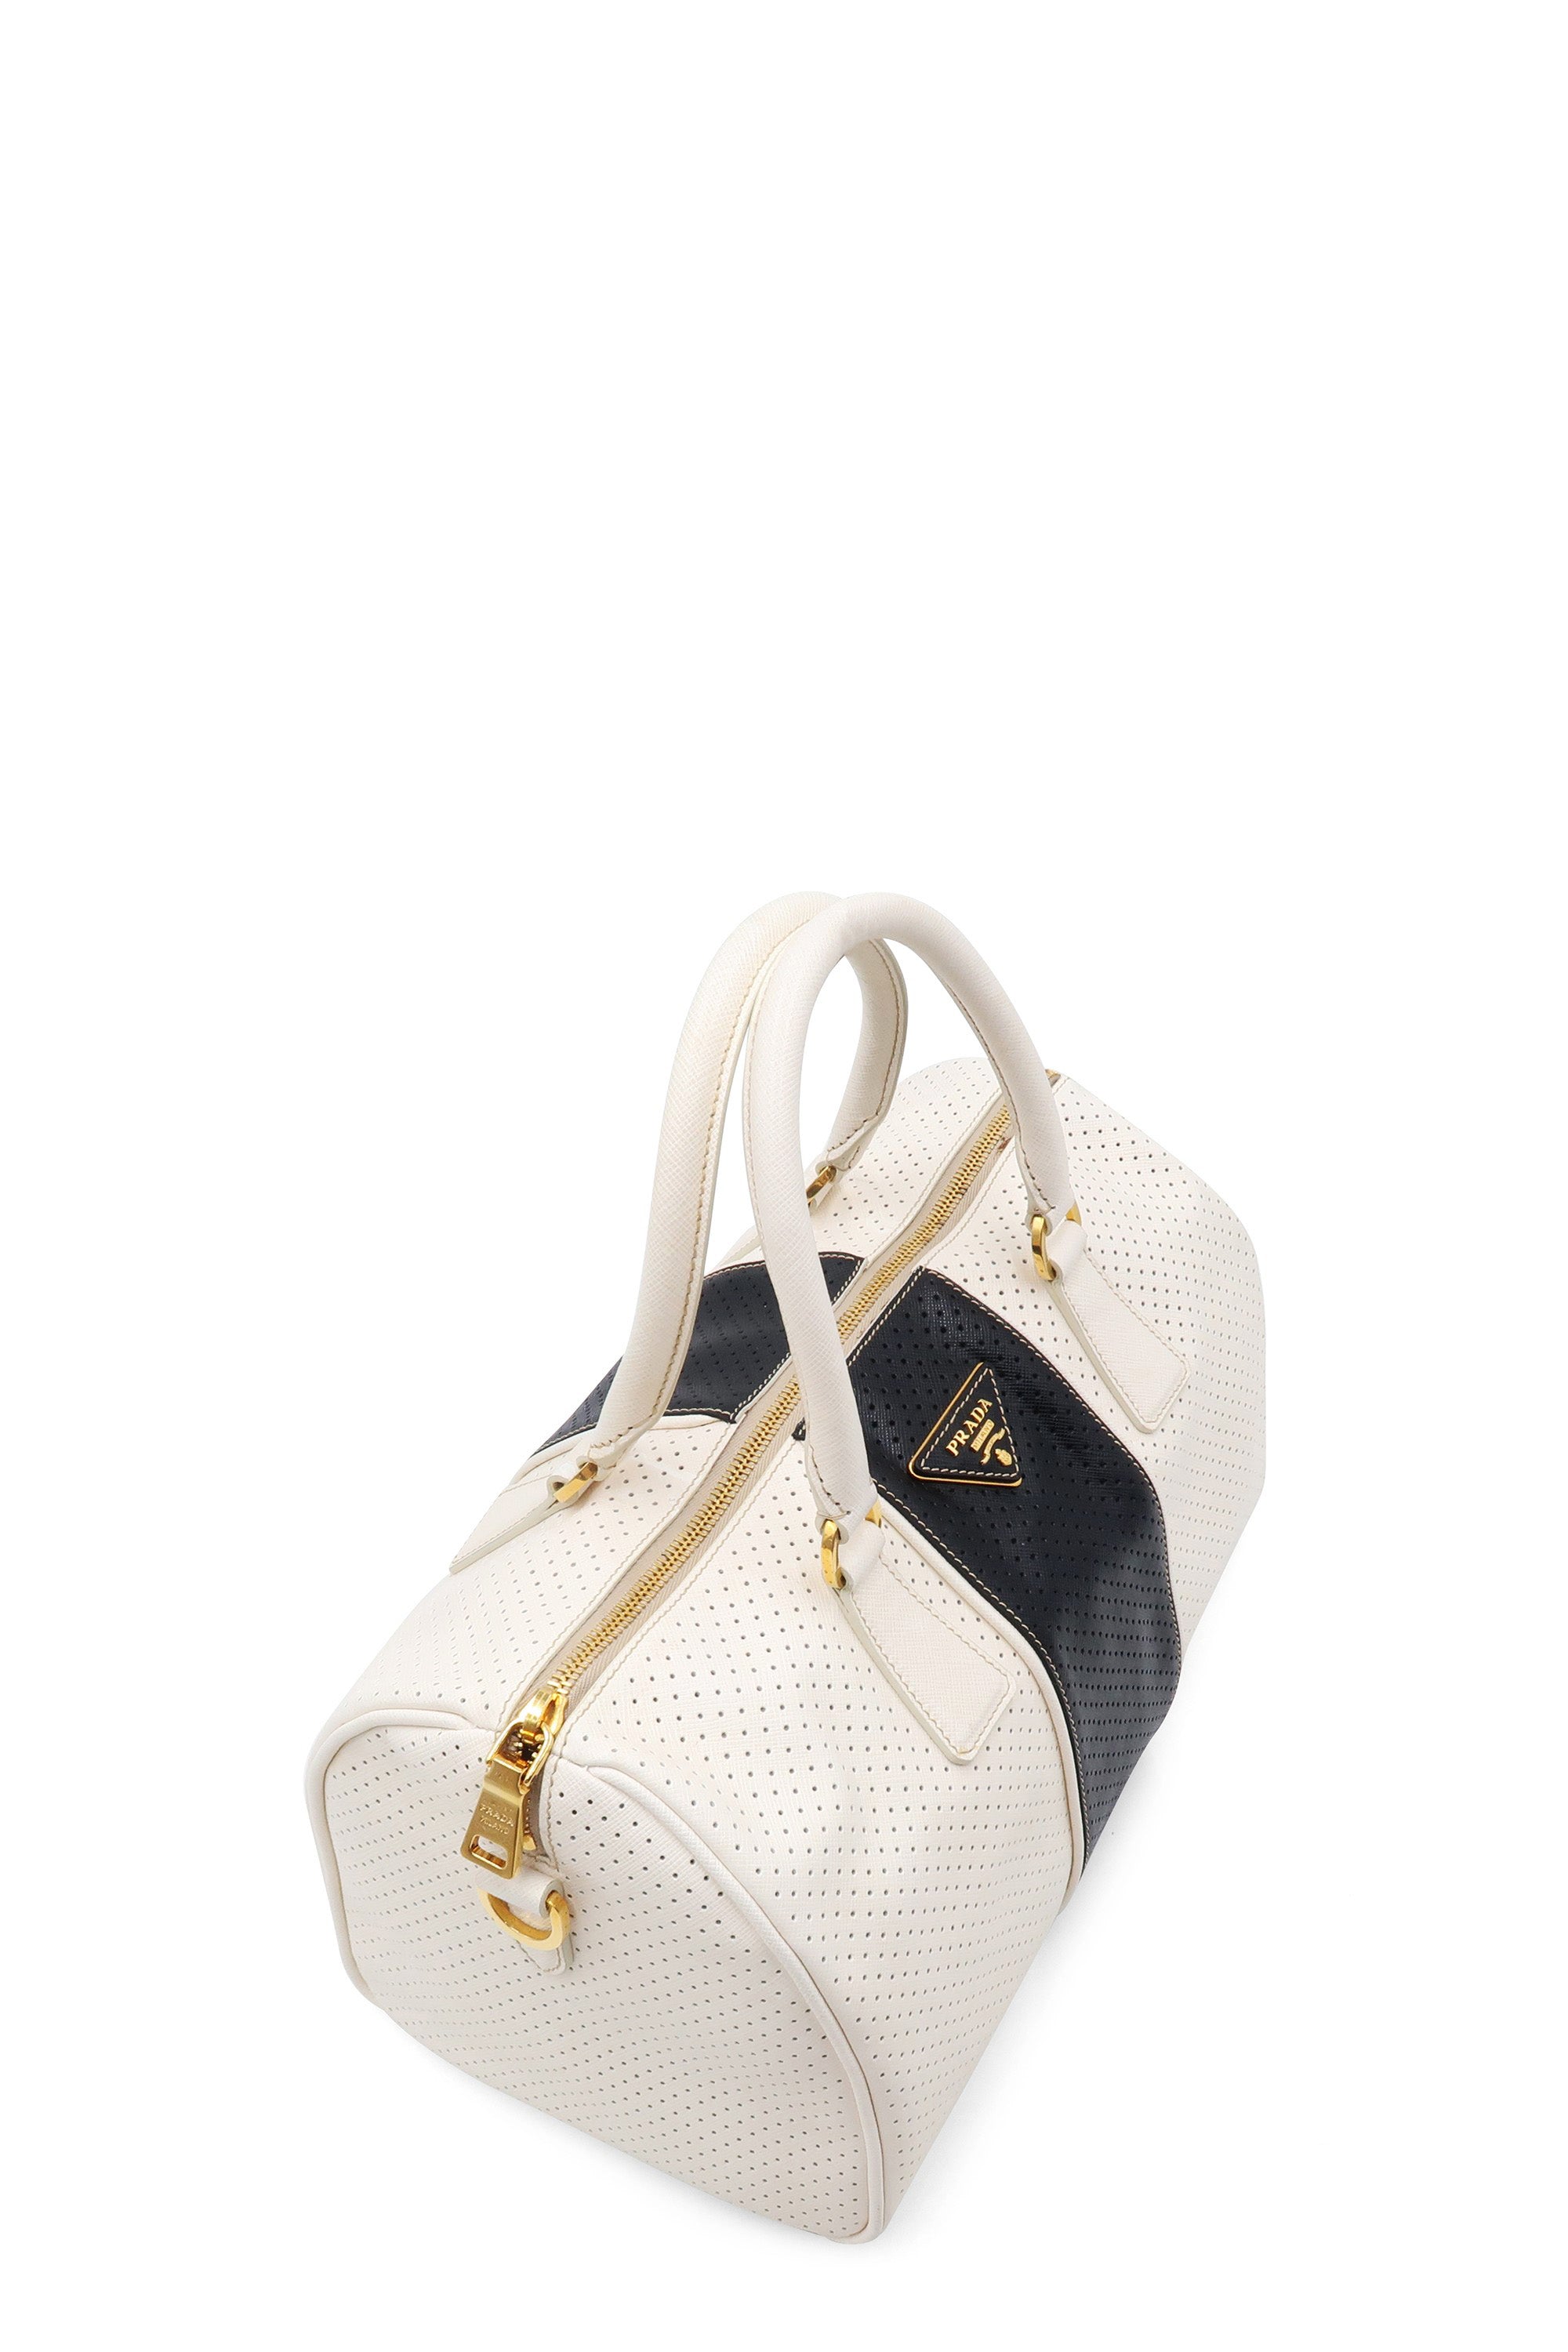 Buy Authentic, Preloved Prada Saffiano Fori Perforated Boston Bag Bianco  Black Bags from Second Edit by Style Theory